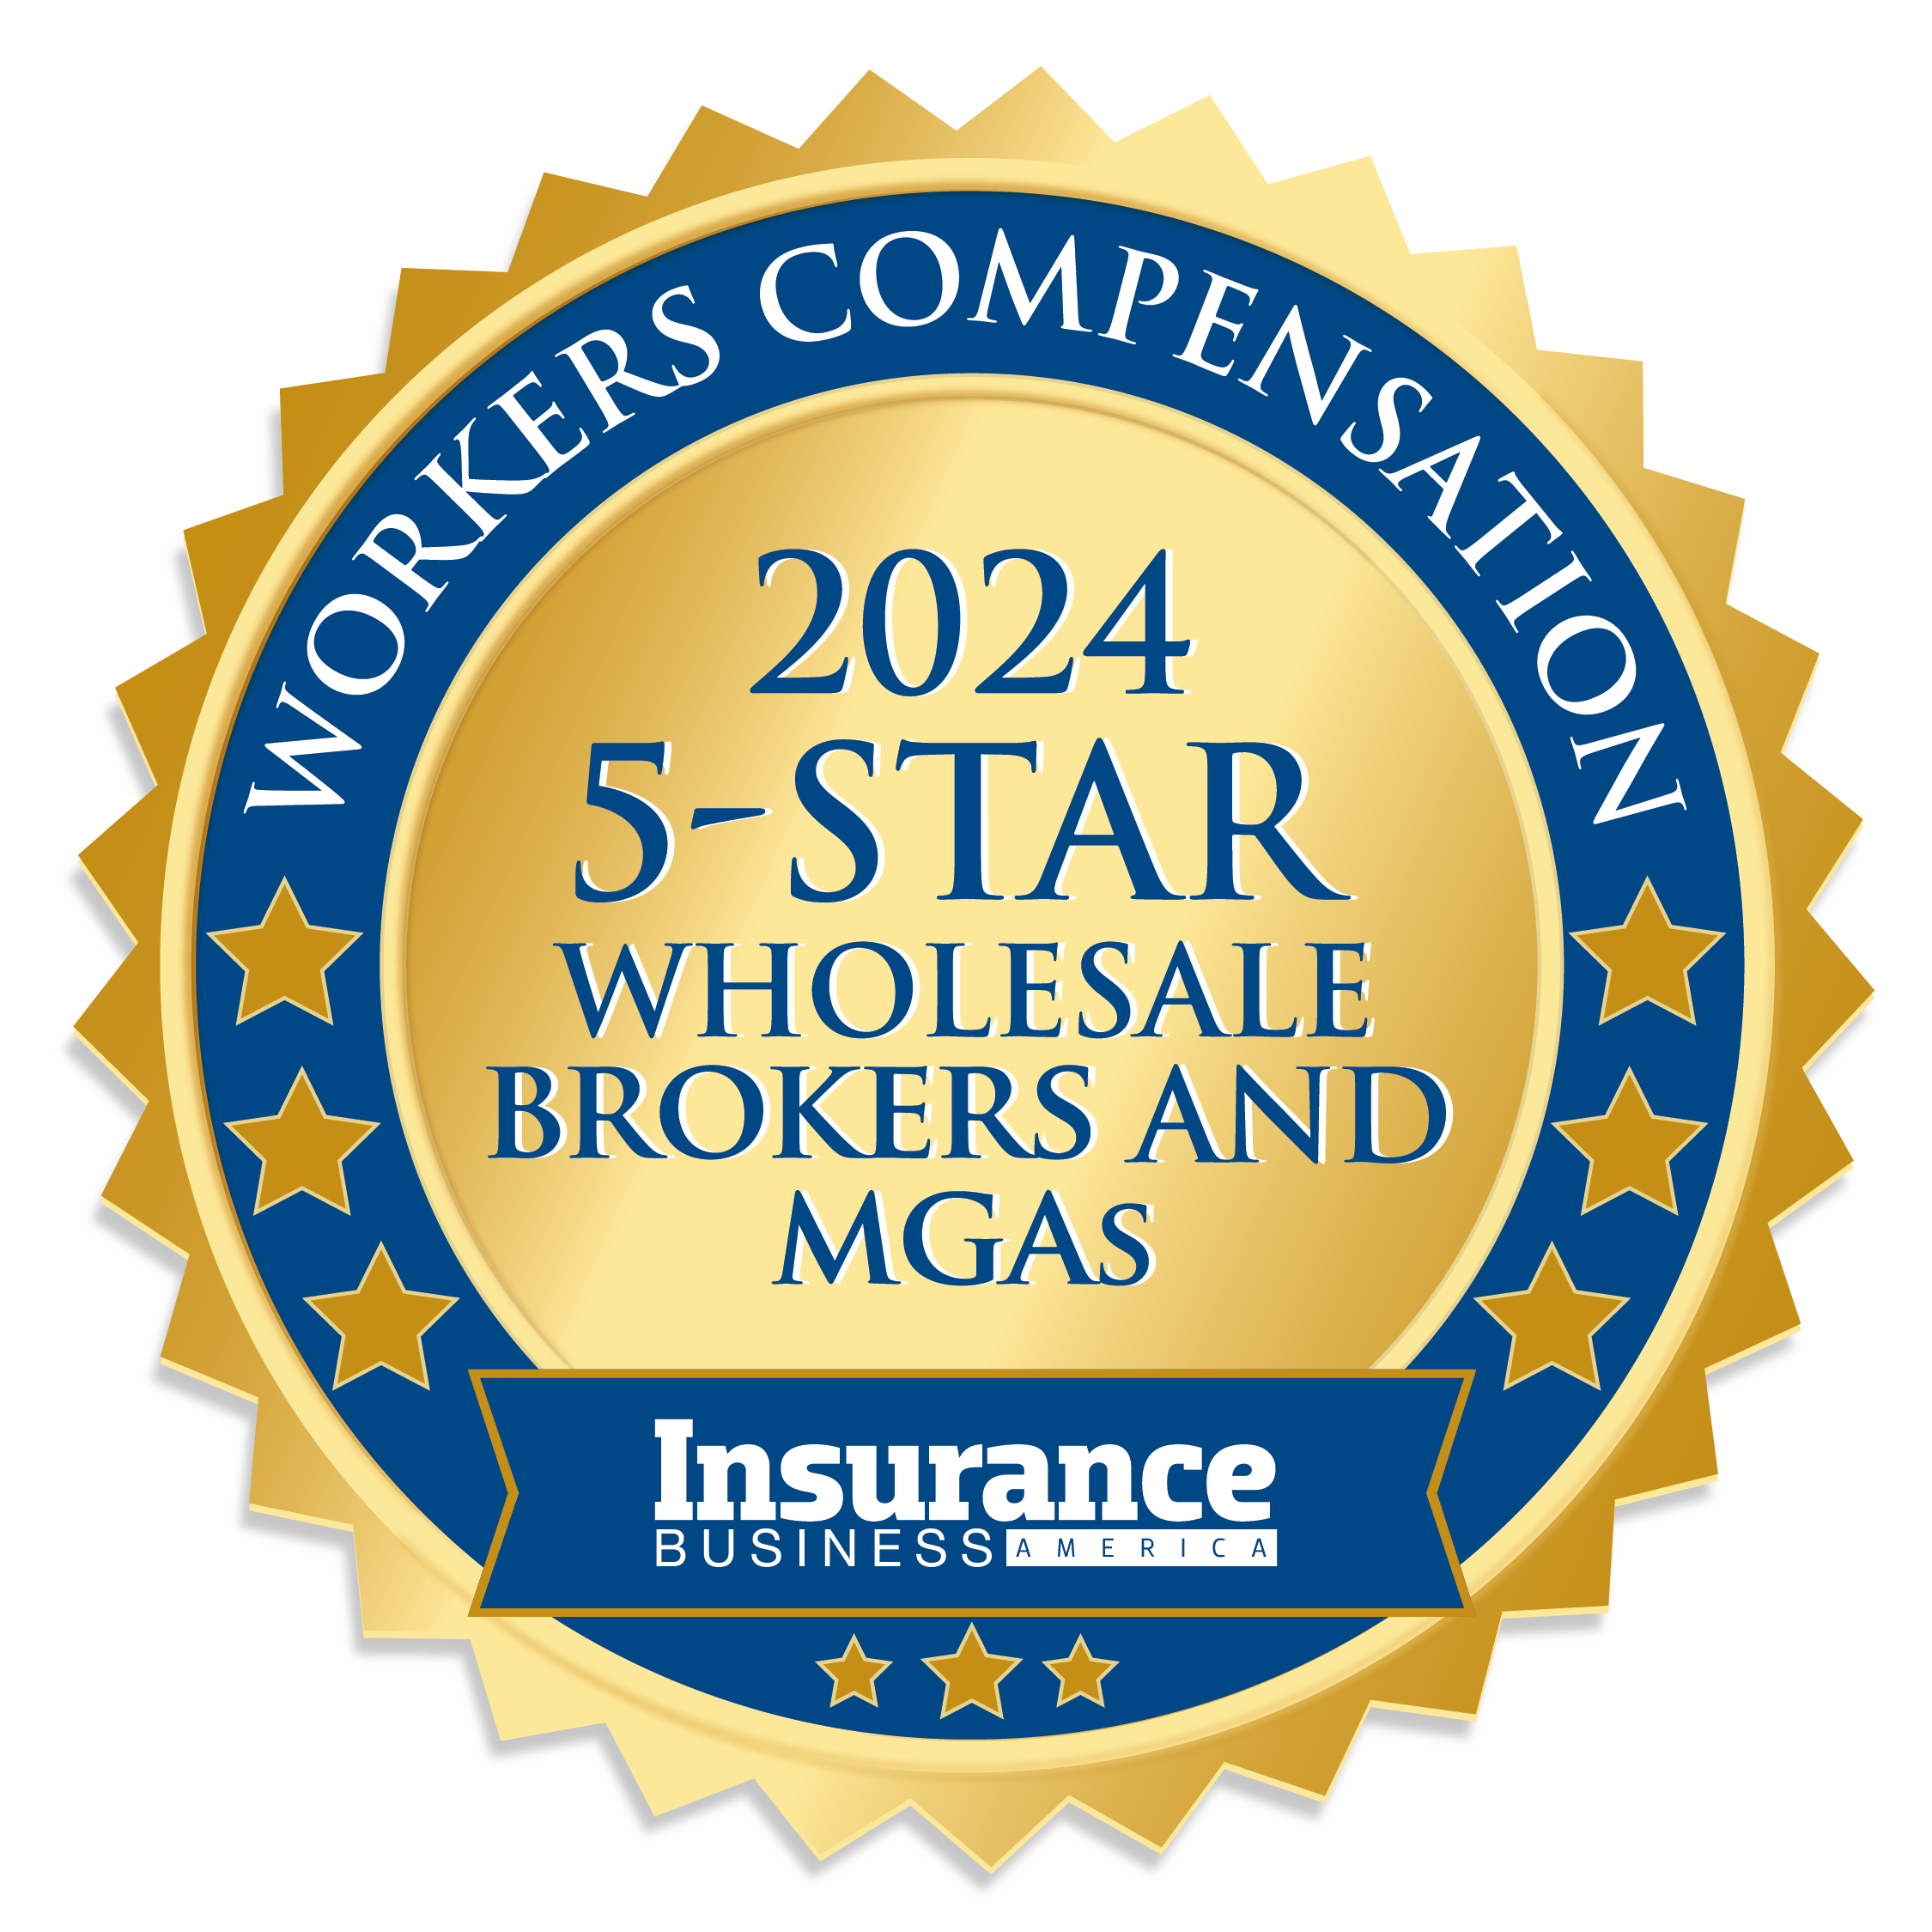 IBA 5-Star Wholesale Brokers and MGA 2024 Workers Compensation GOLD